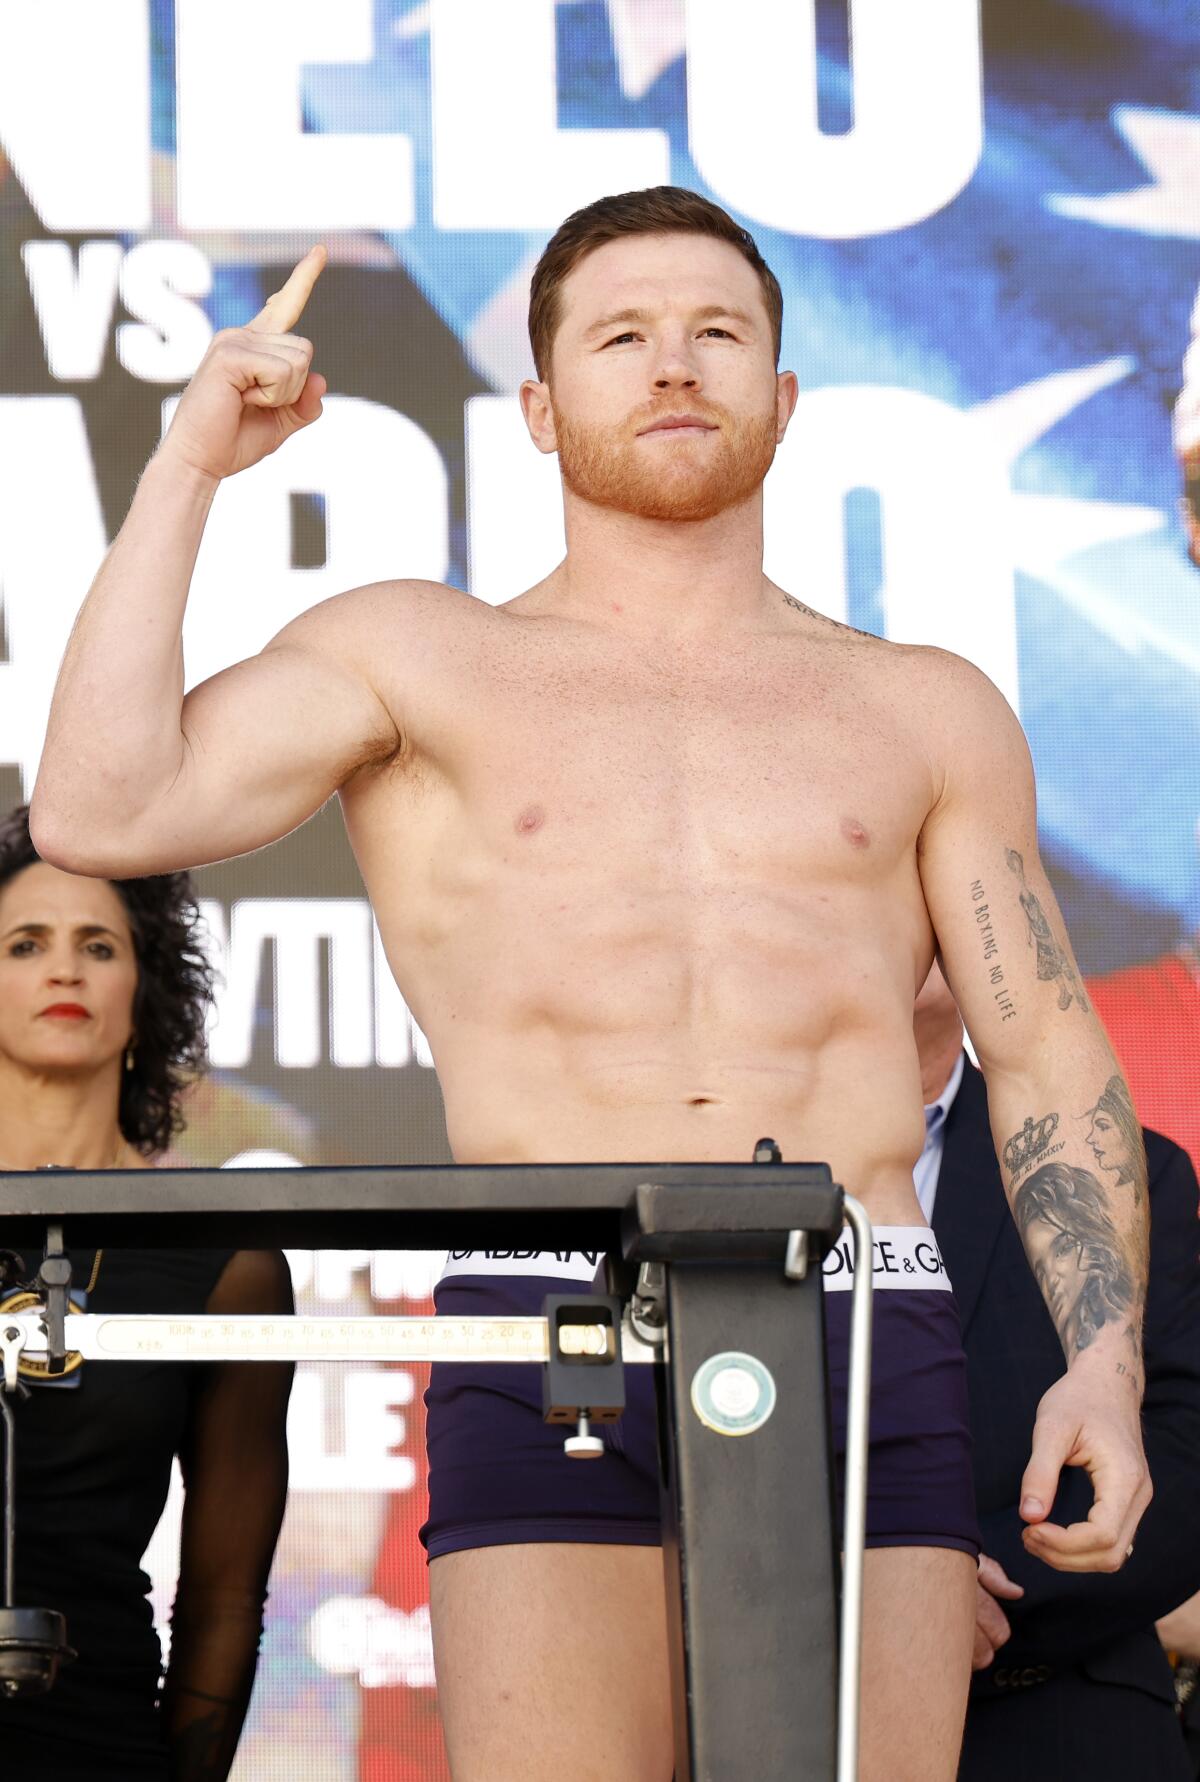 Undisputed super middleweight champion Saul “Canelo” Alvarez poses on a scale during a ceremonial weigh-in in Las Vegas